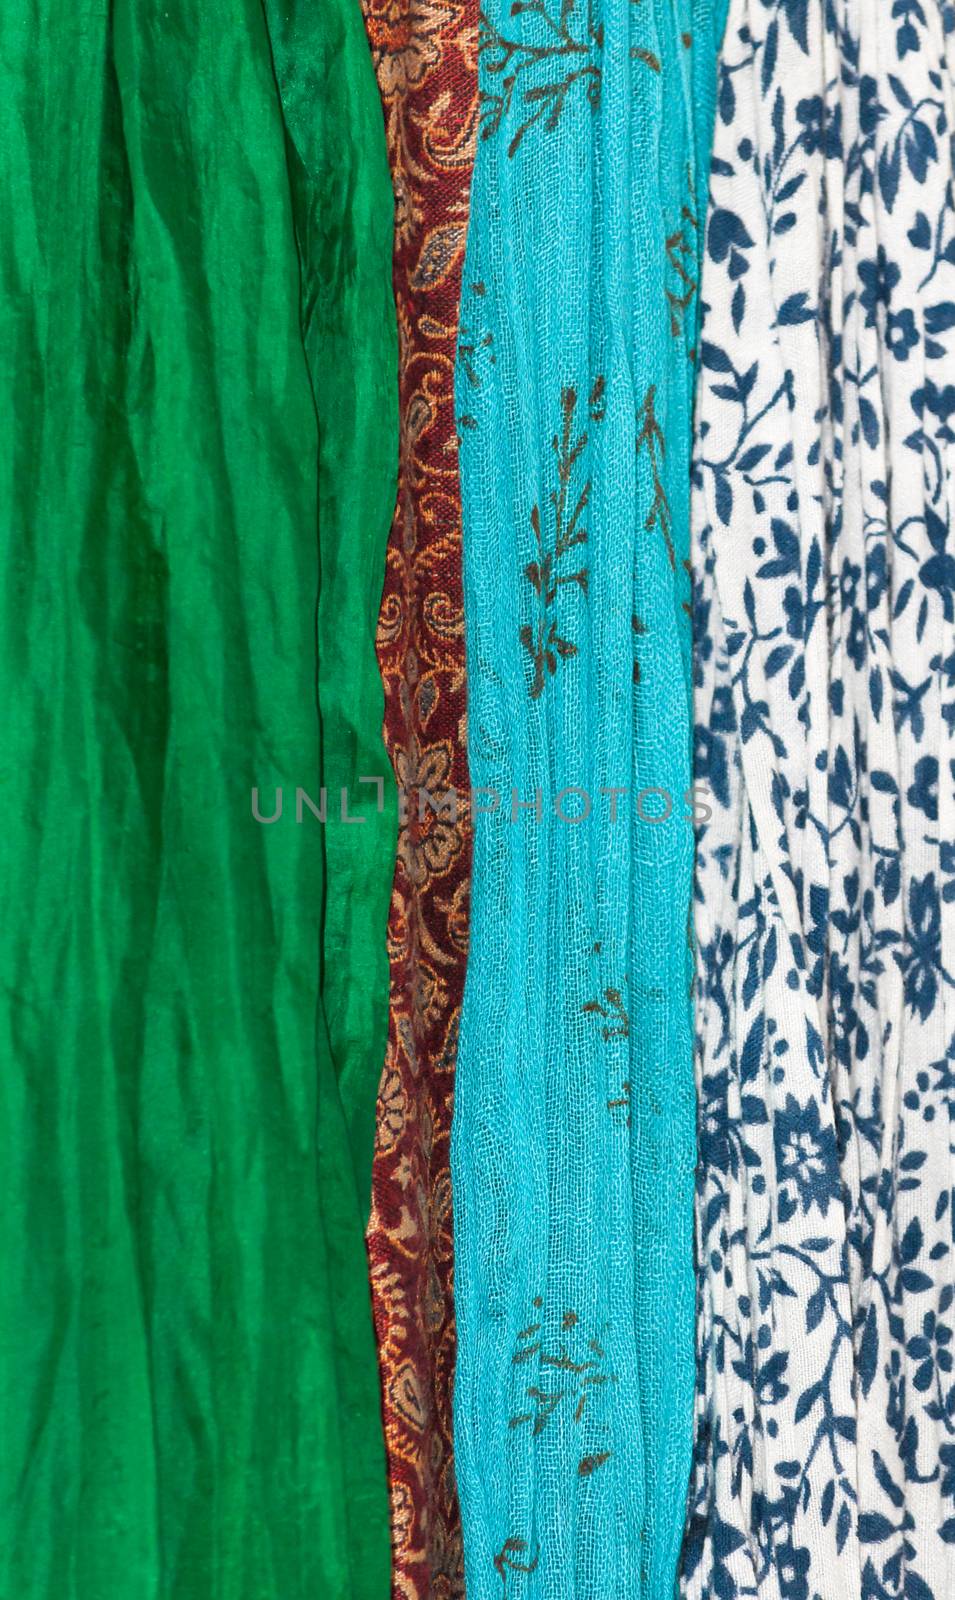 Fabrics vertical. Assortment of fabrics in organic theme - green silk, red indian wool, turquoise gauzy cotton and white cotton with marine blue floral.